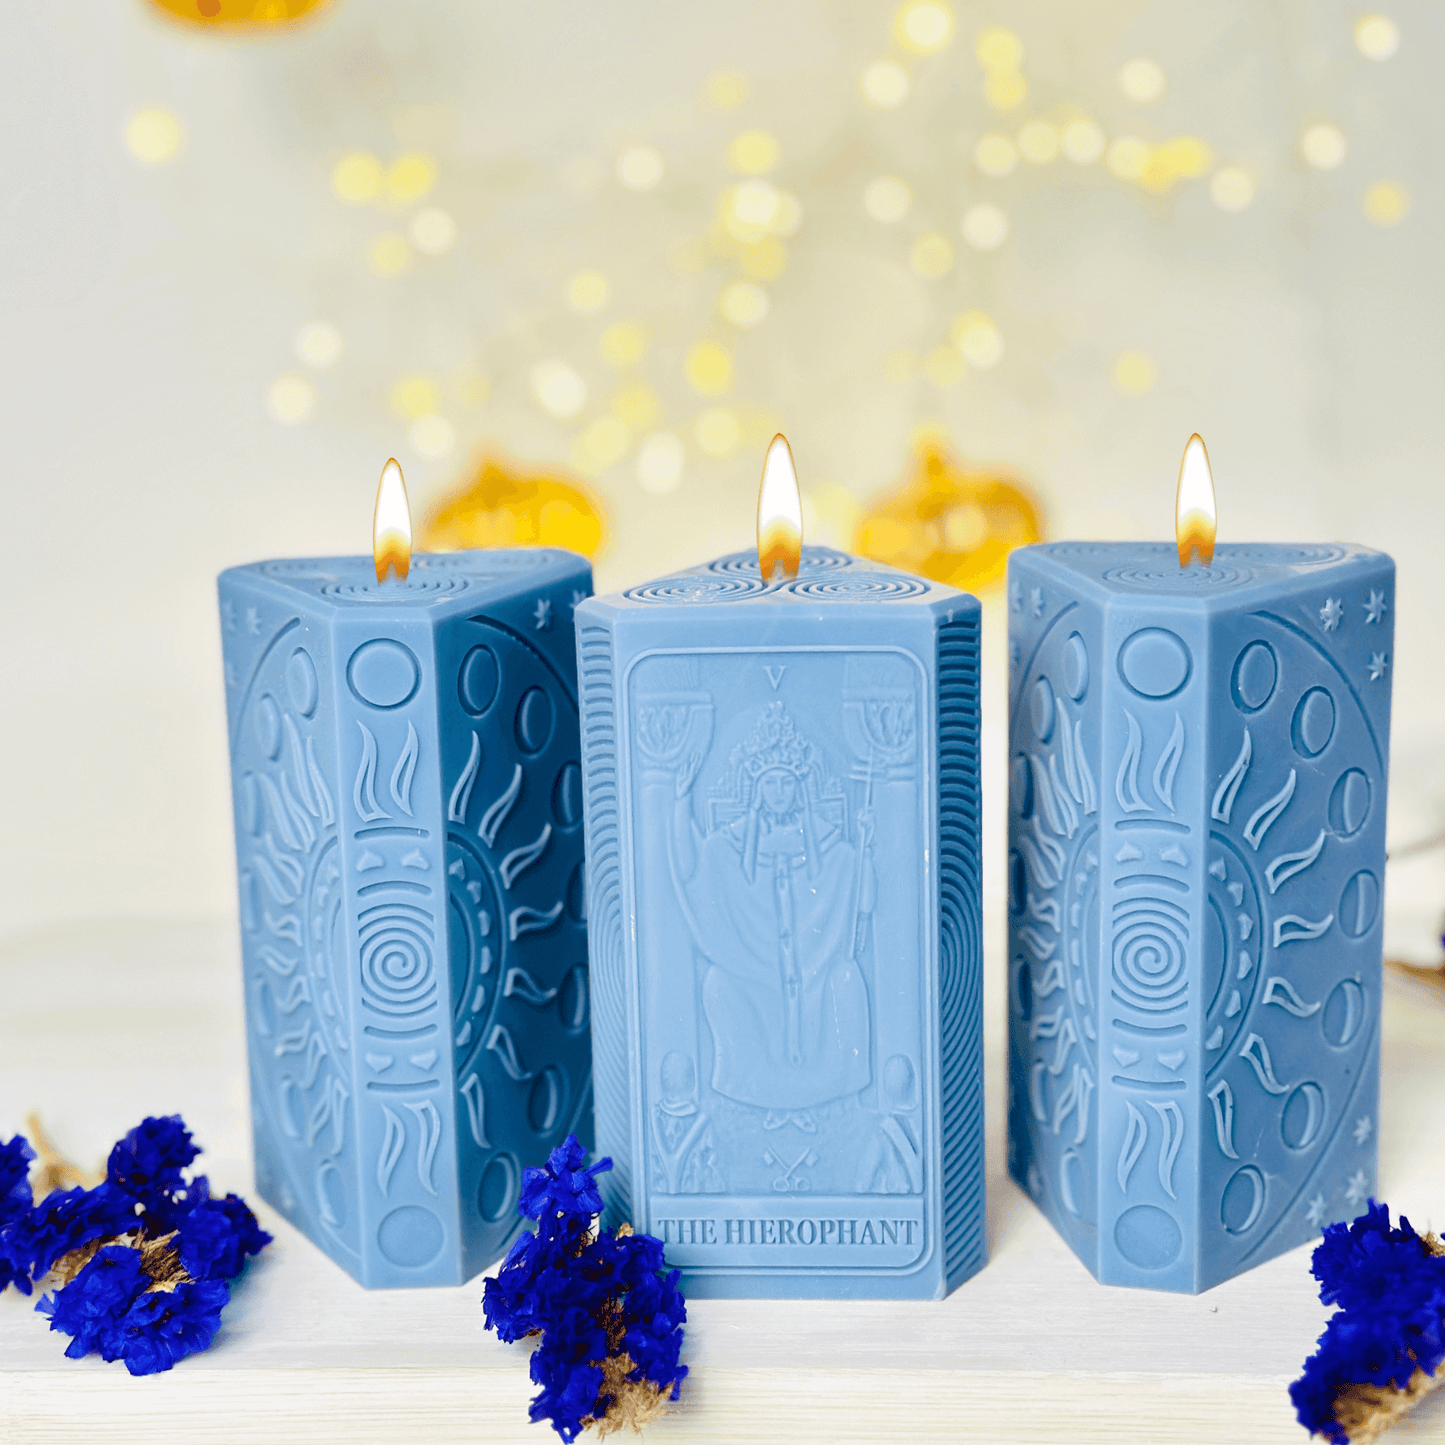 Tarot card and moon phases candle mold, The Hierophant Silicone candle mold